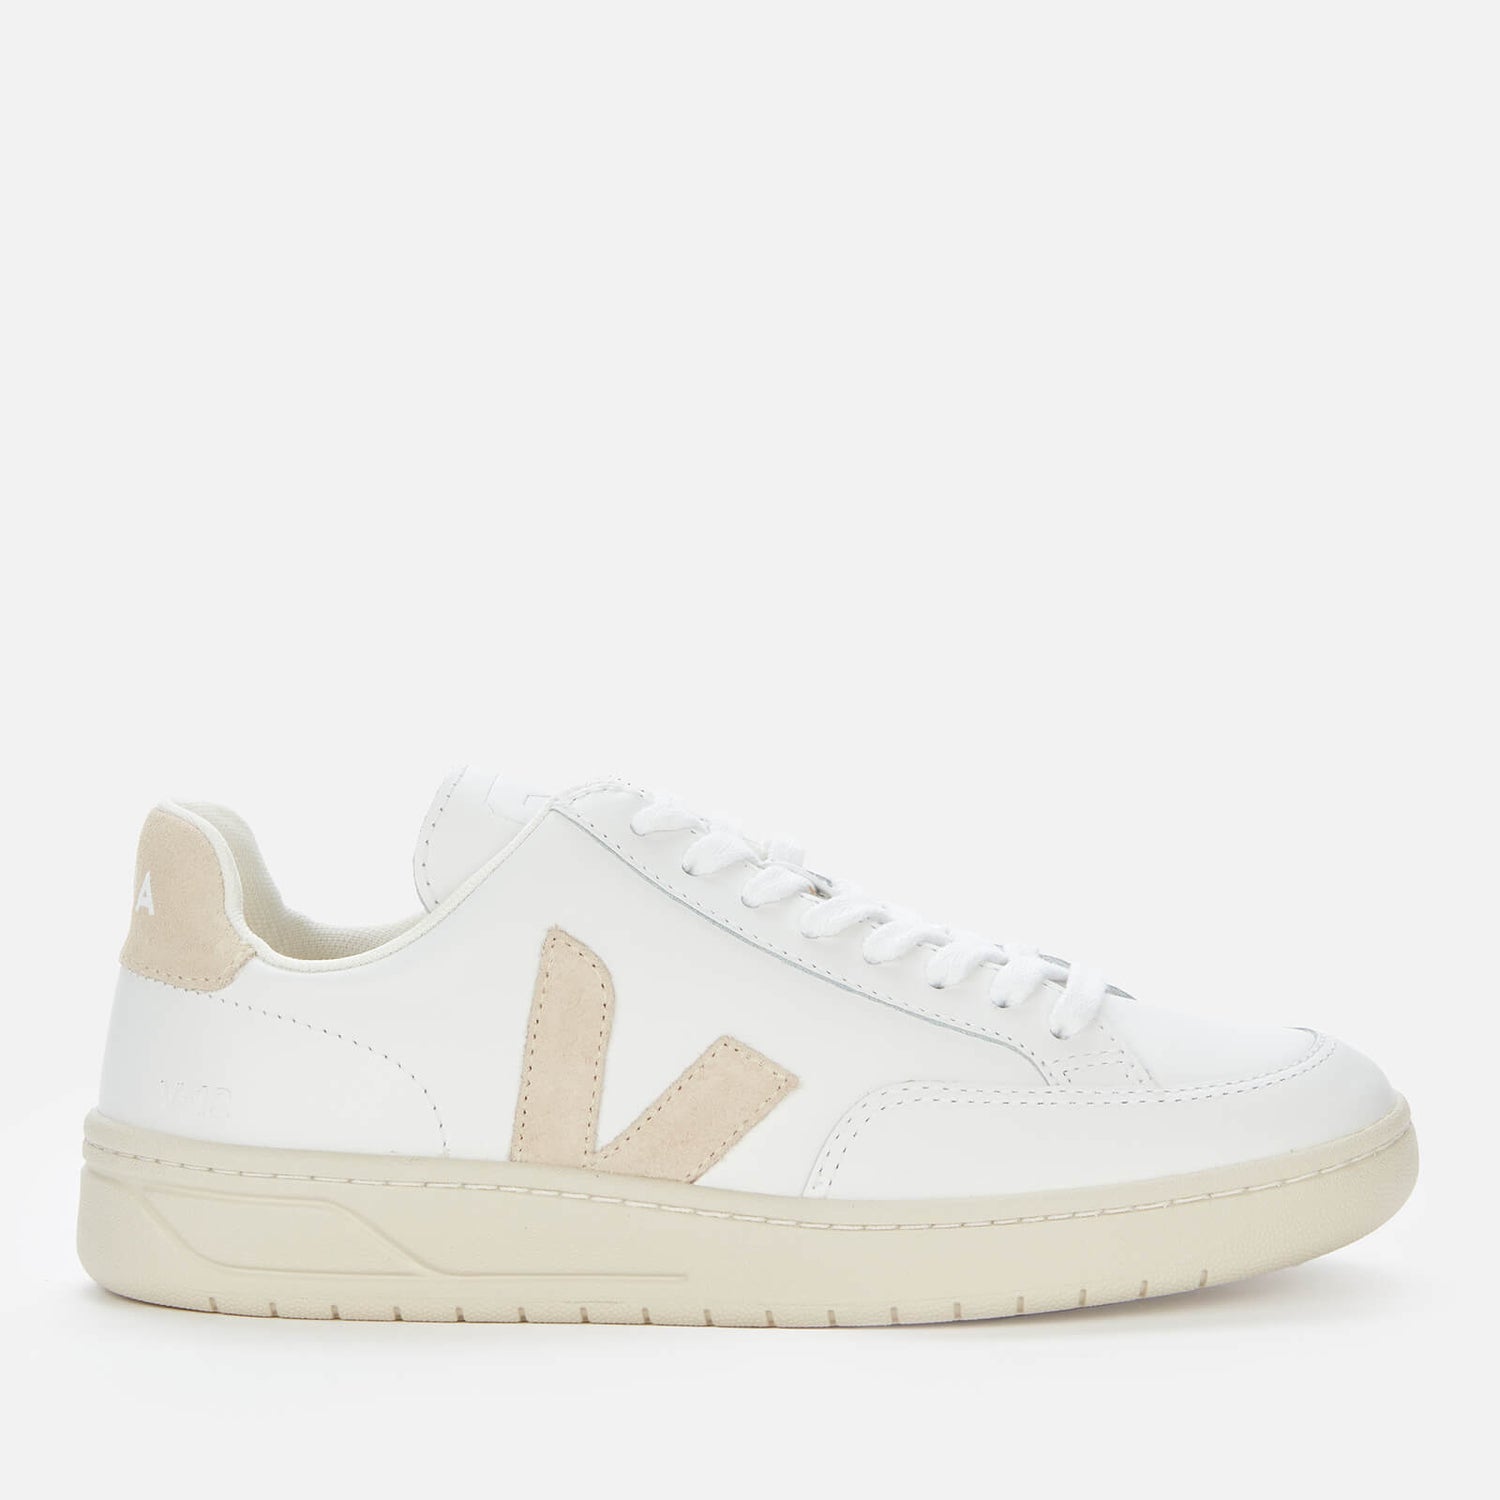 Veja Women's V-12 Leather Trainers - Extra White/Sable - UK 2